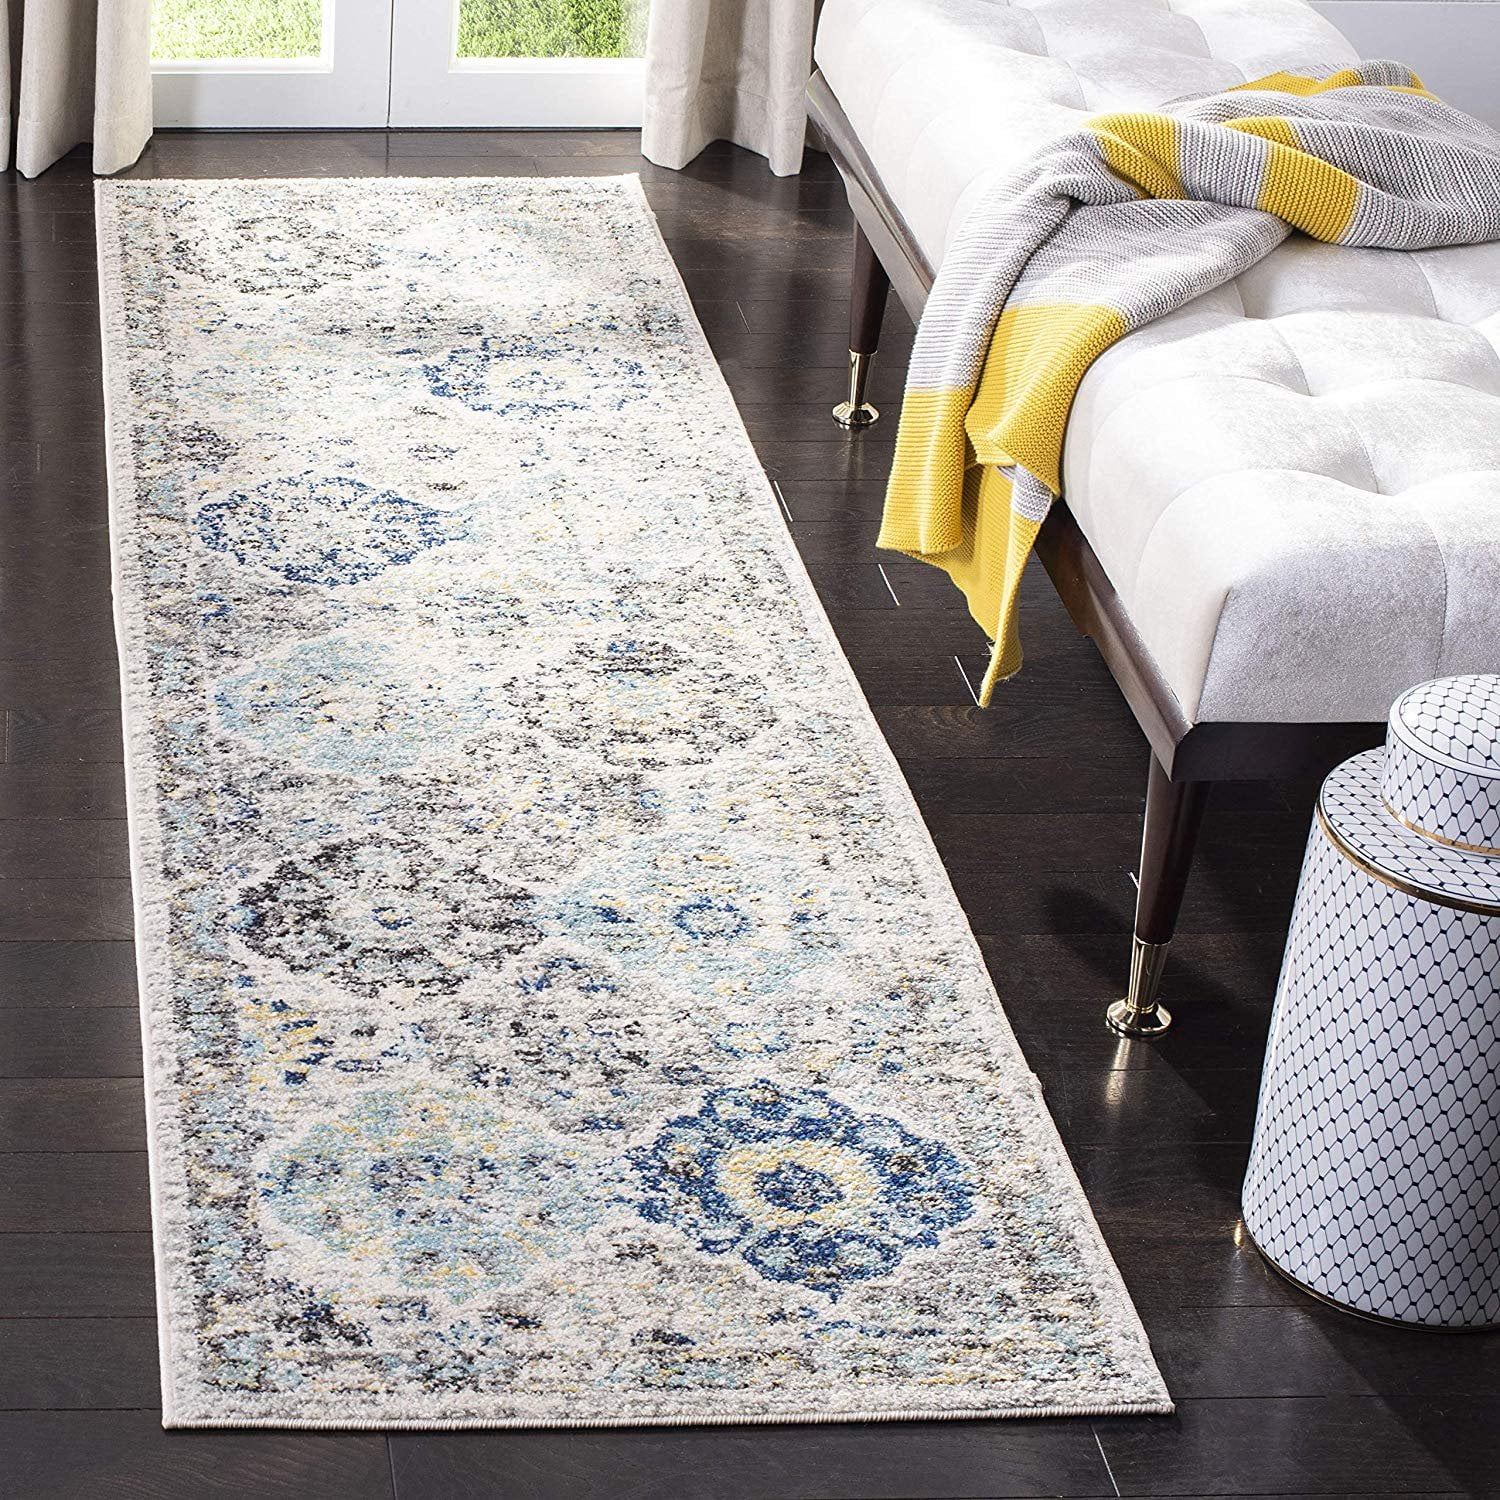 White//Royal Blue Safavieh Madison Collection MAD611C Bohemian Chic Vintage Distressed Area Rug 2 3 x 4